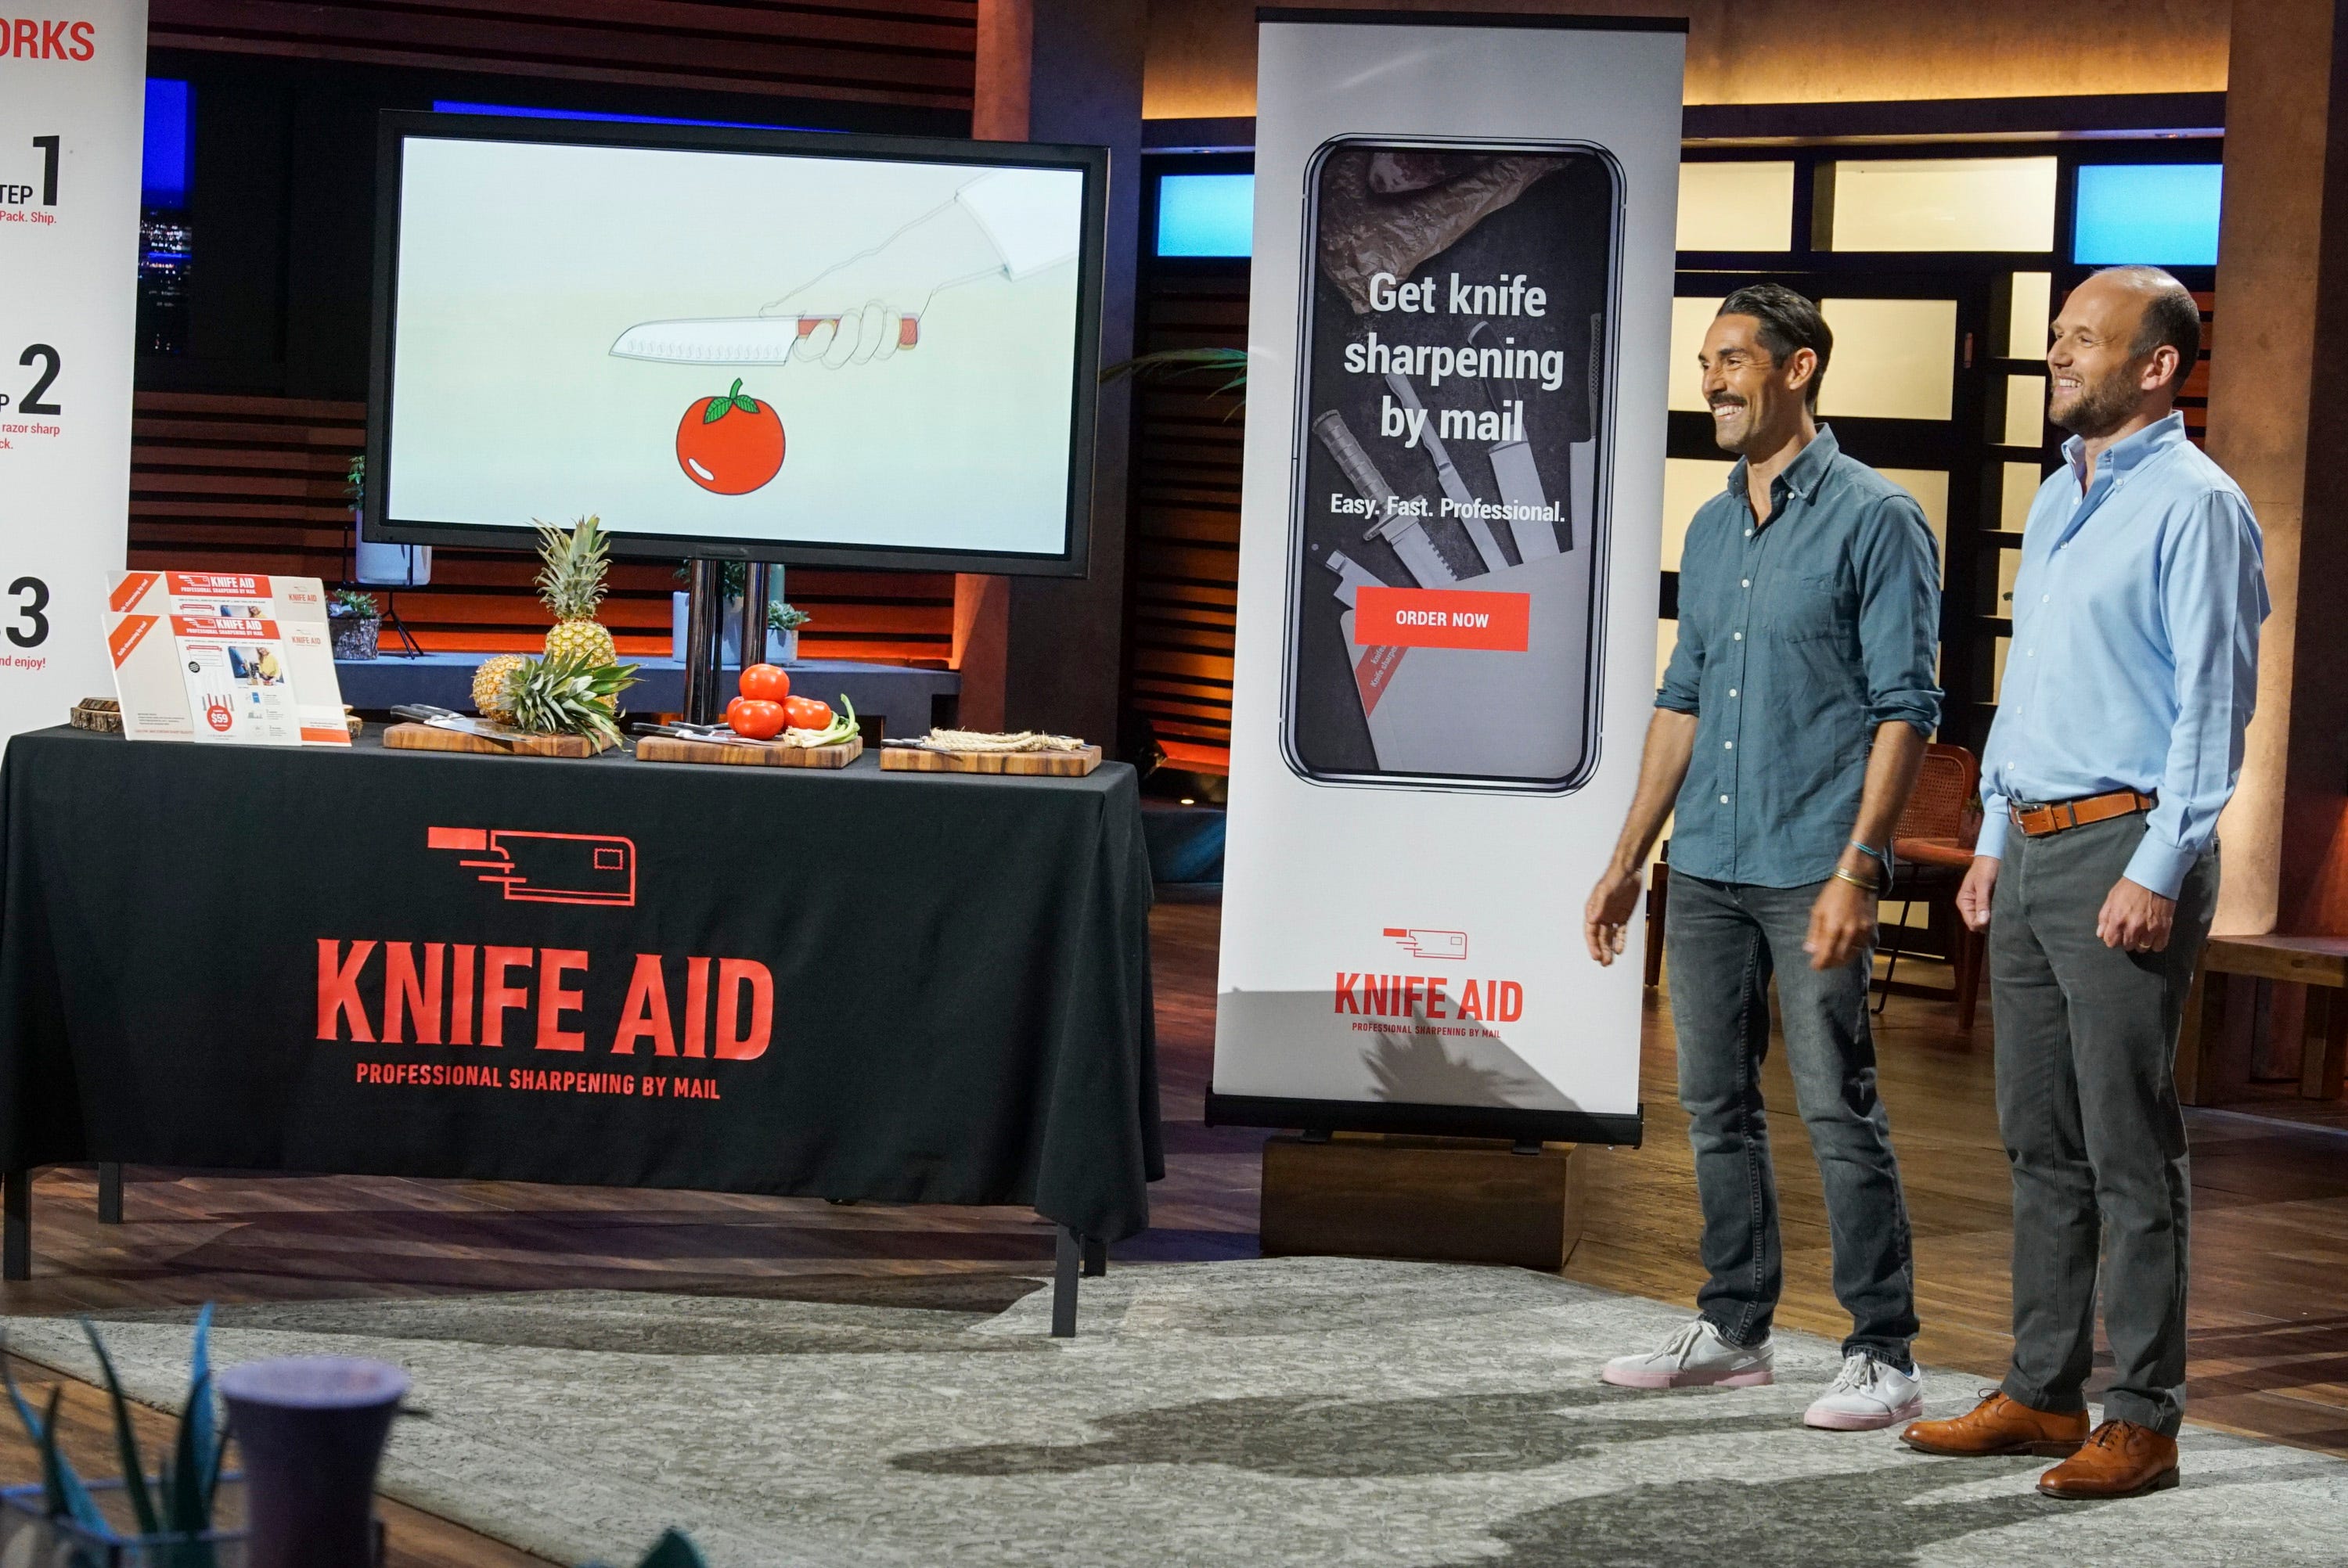 Mikael Soderlindh and Marc Lickfett, entrepreneurs from Malibu, California, have modernized an age-old craft by offering knife sharpening by mail. They brought their company to "Shark Tank."